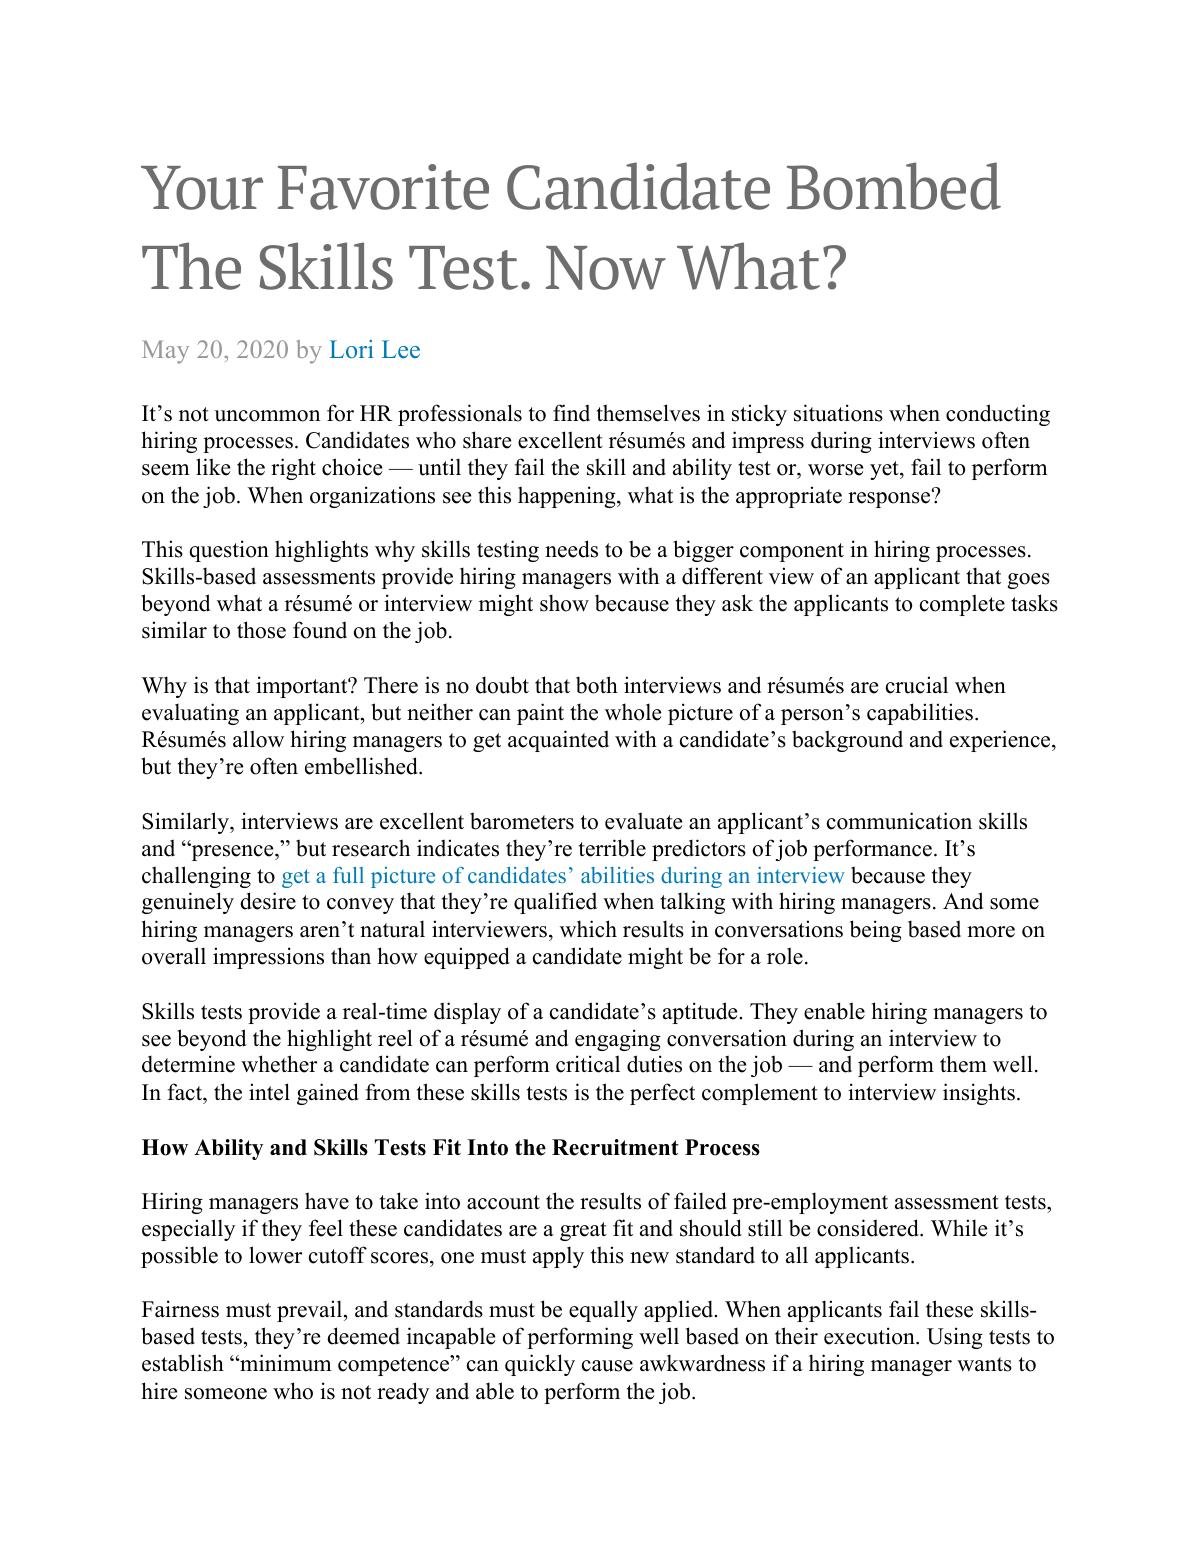 Your Favorite Candidate Bombed the Skills Test. Now What?